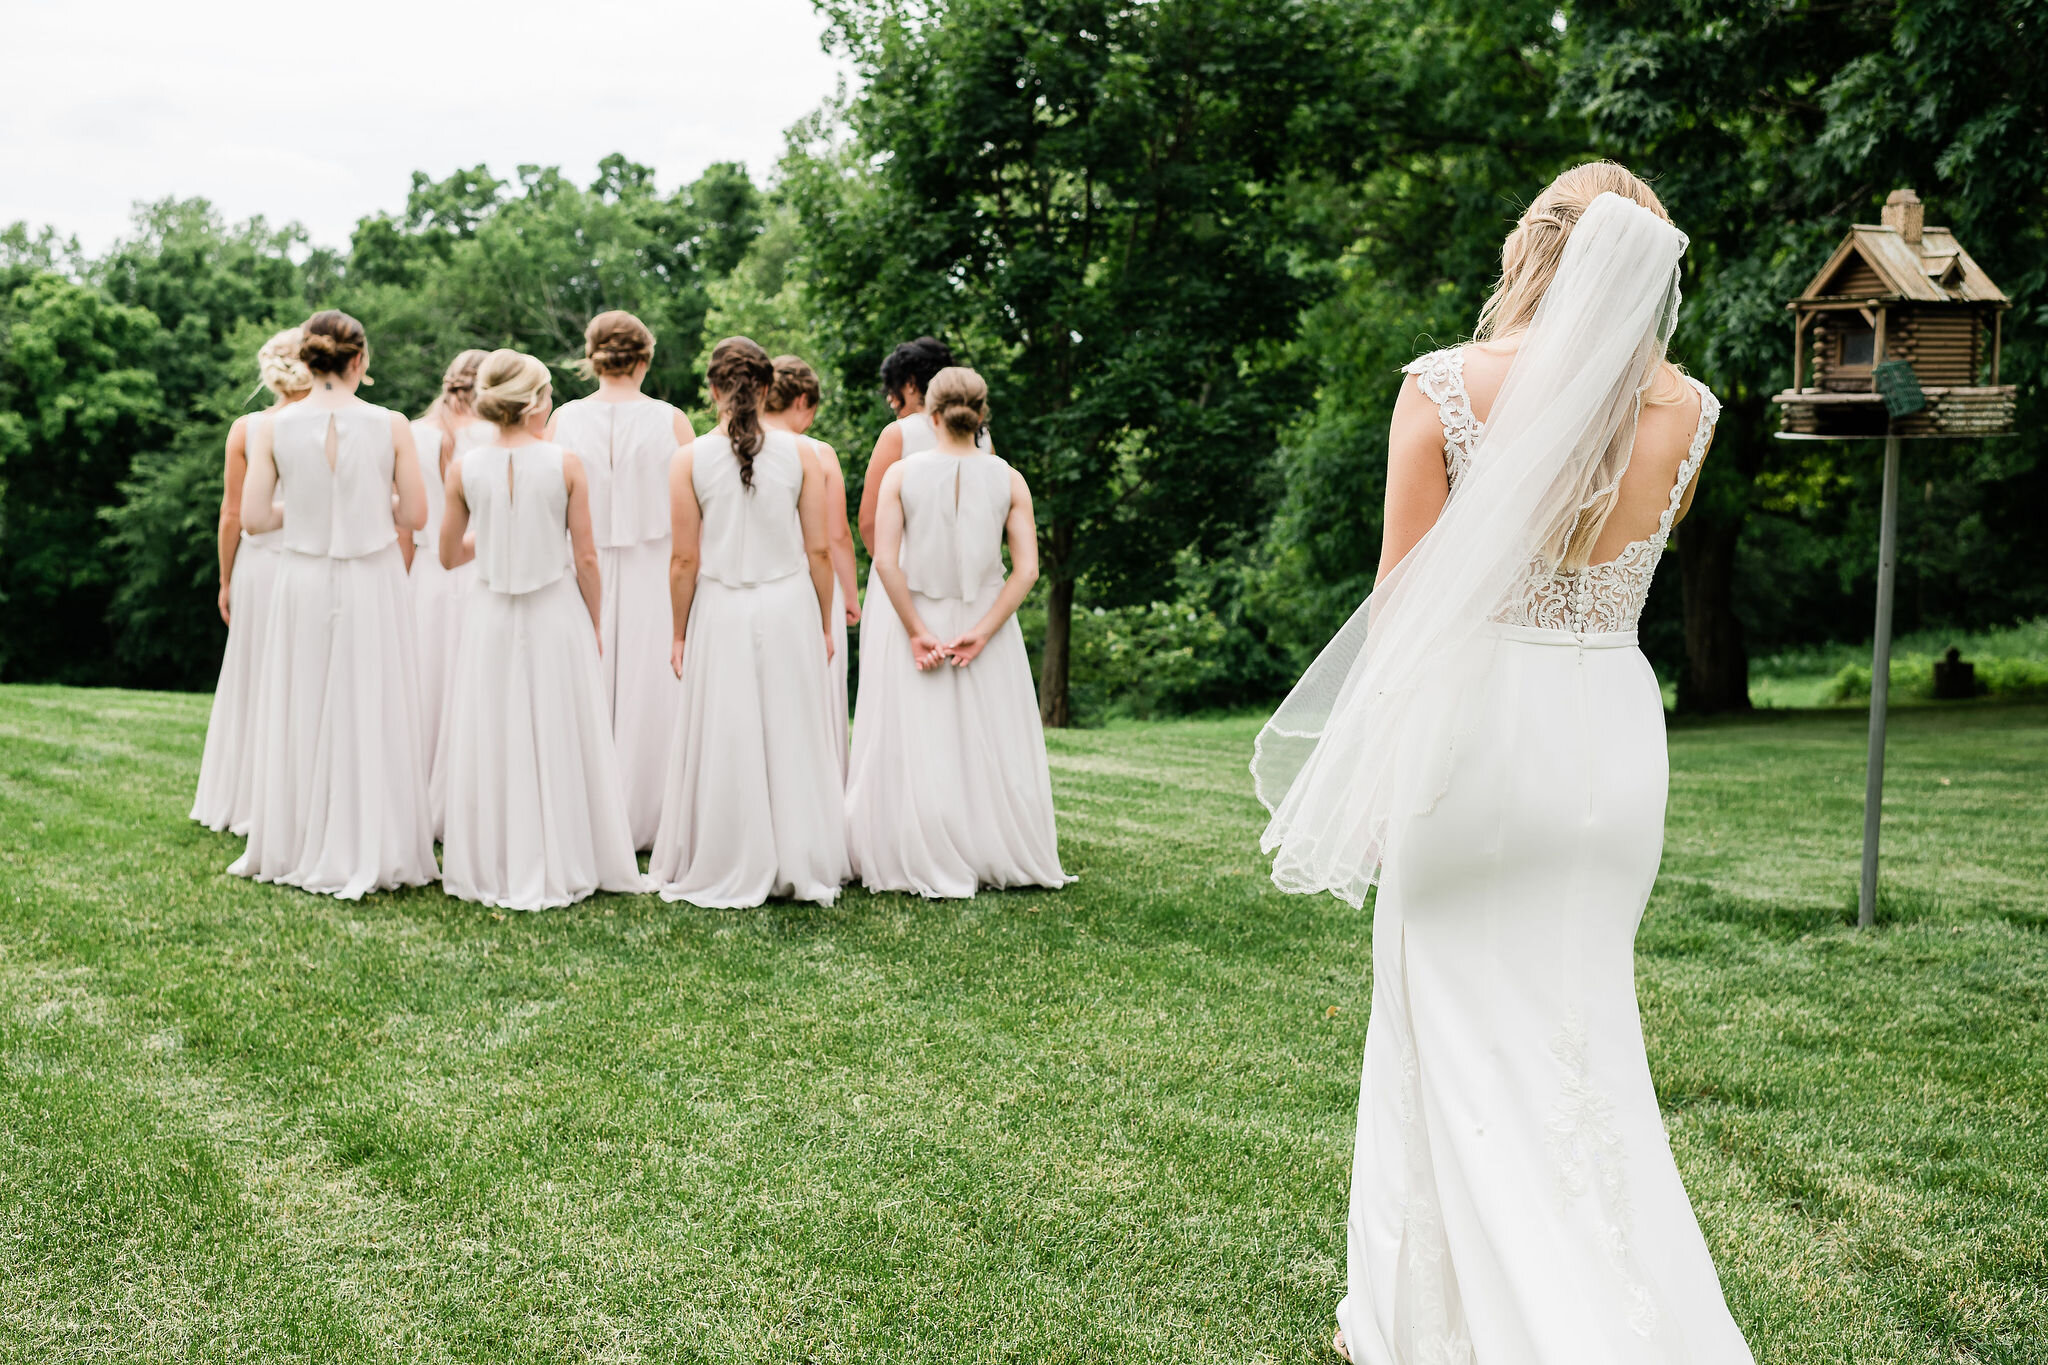 Bride standing behind bridesmaids for their first look